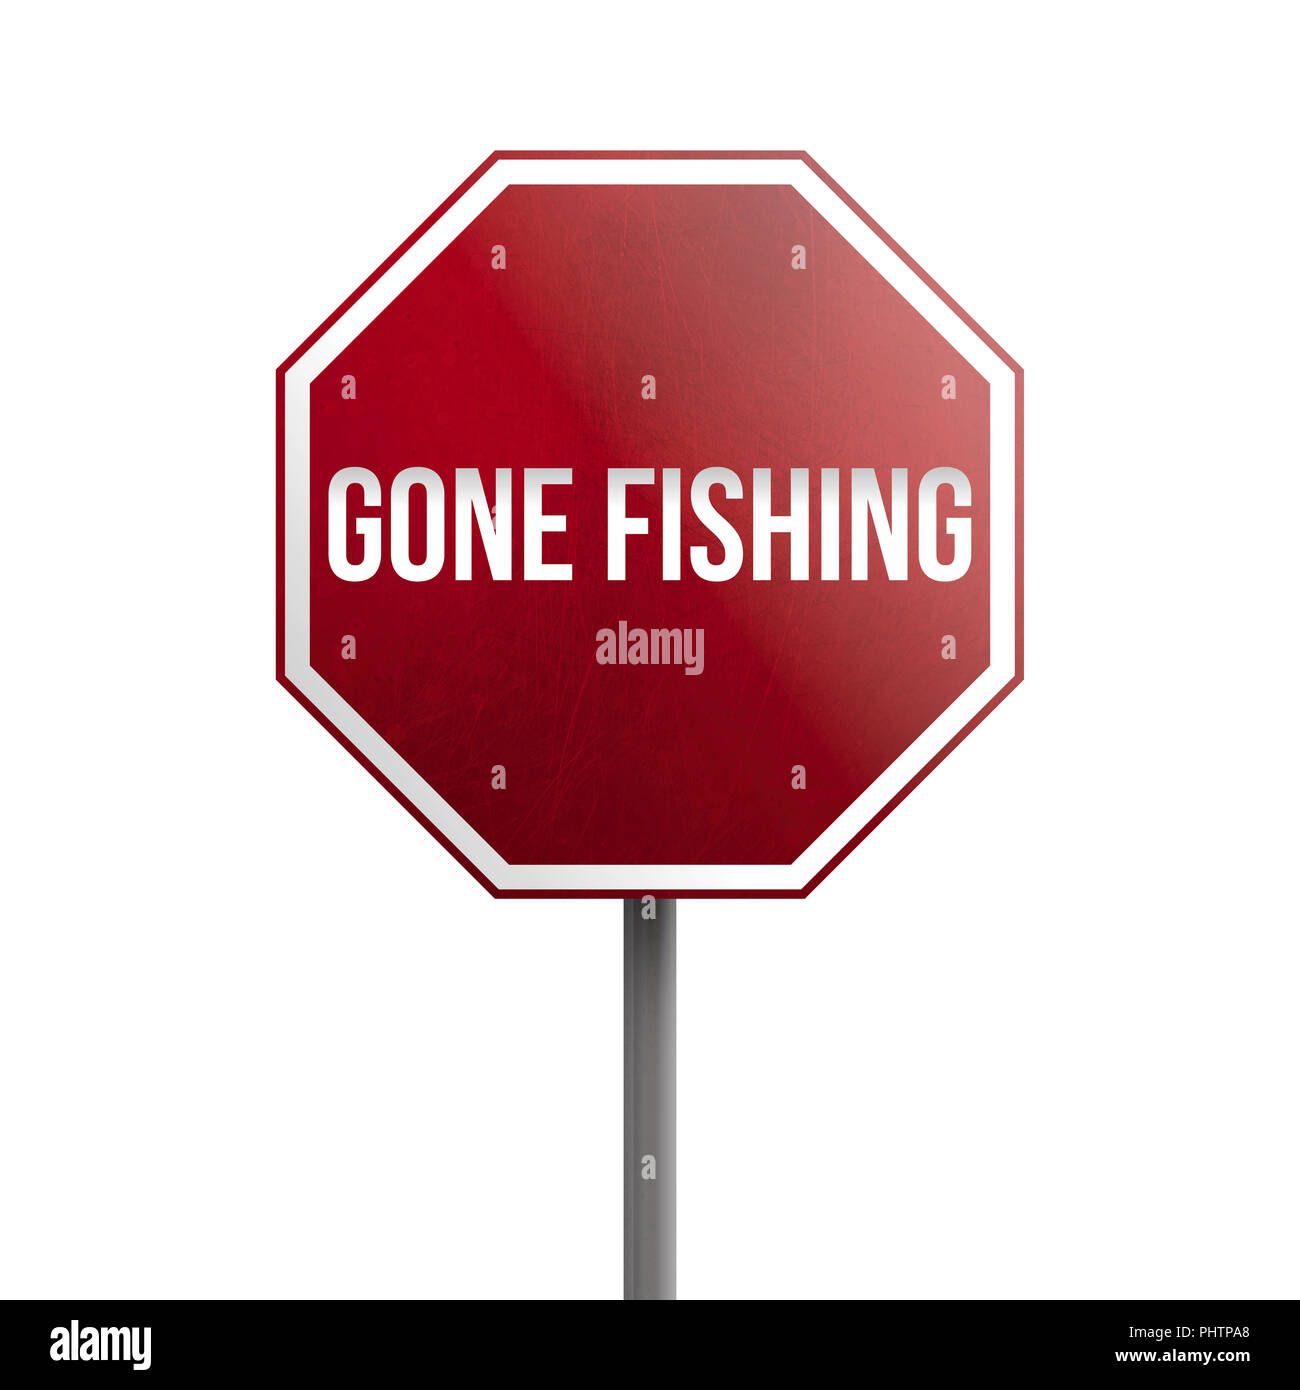 Gone Fishing - Red Sign Isolated On White Background Stock Photo throughout Free Printable Gone Fishing Sign